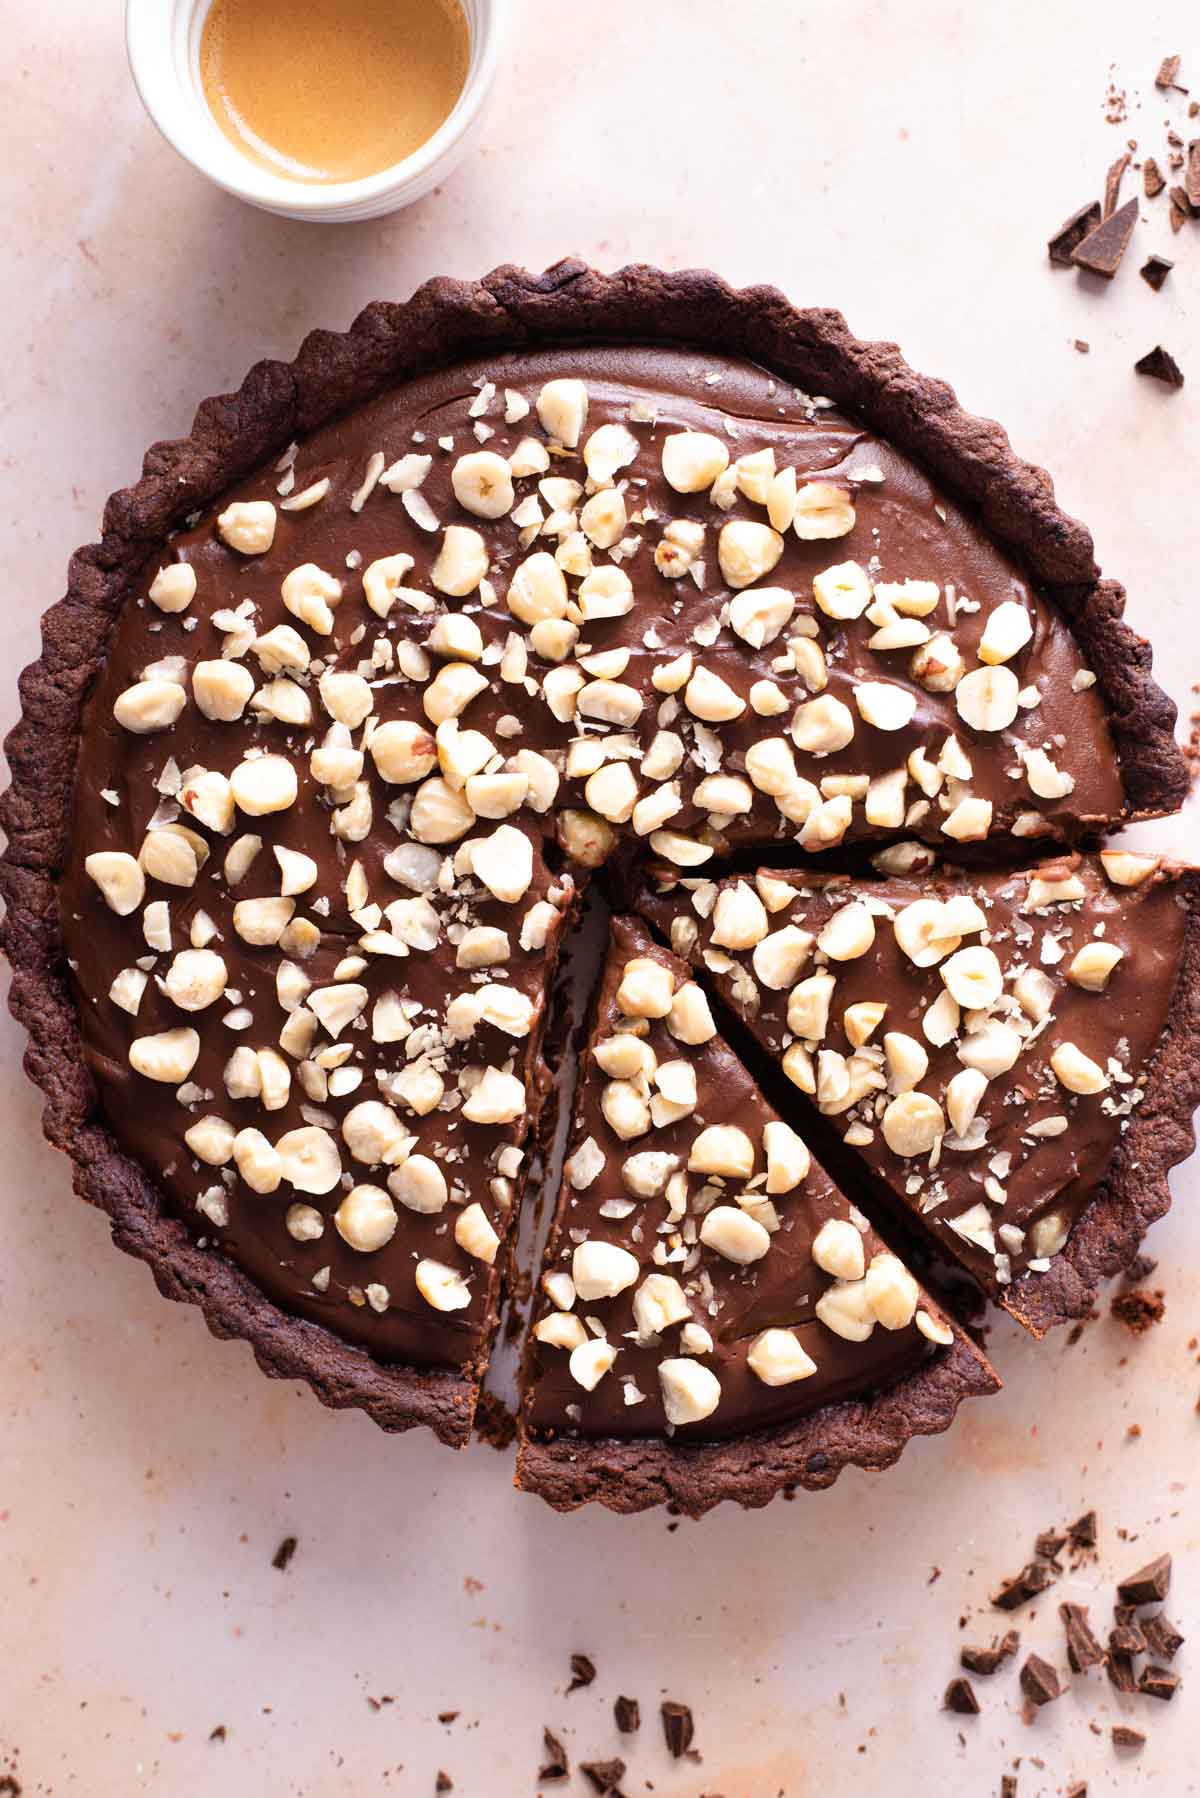 An overhead shot of a chocolate tart topped with hazelnuts